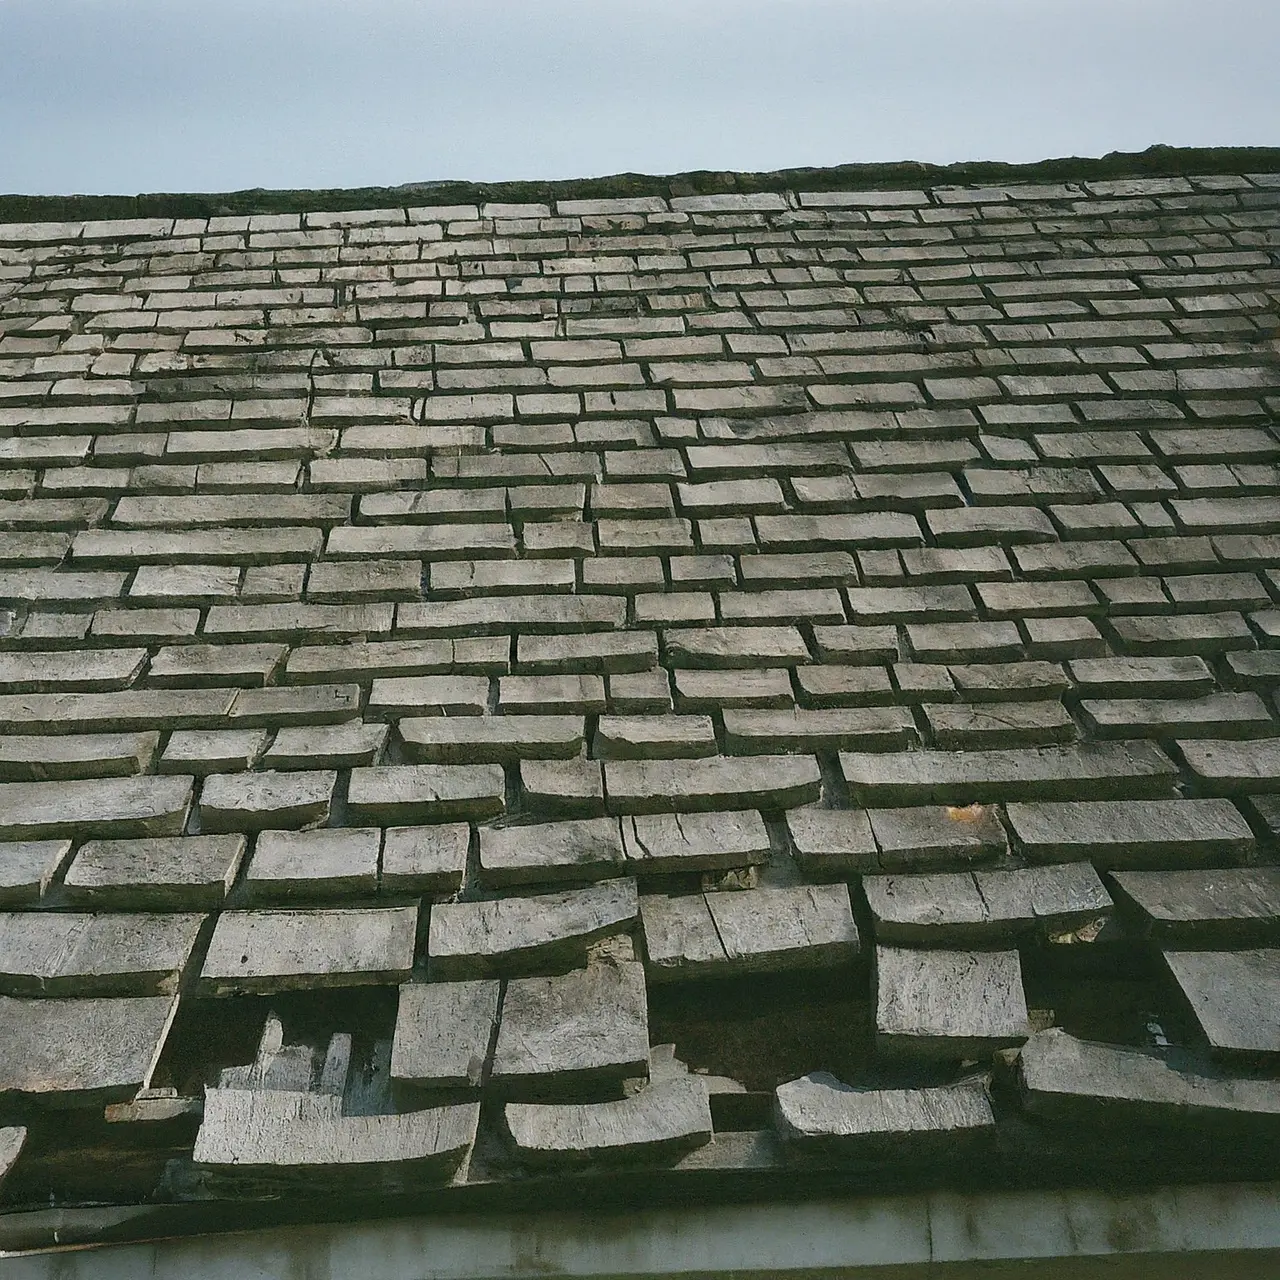 A shingled roof showing signs of wear and damage. 35mm stock photo